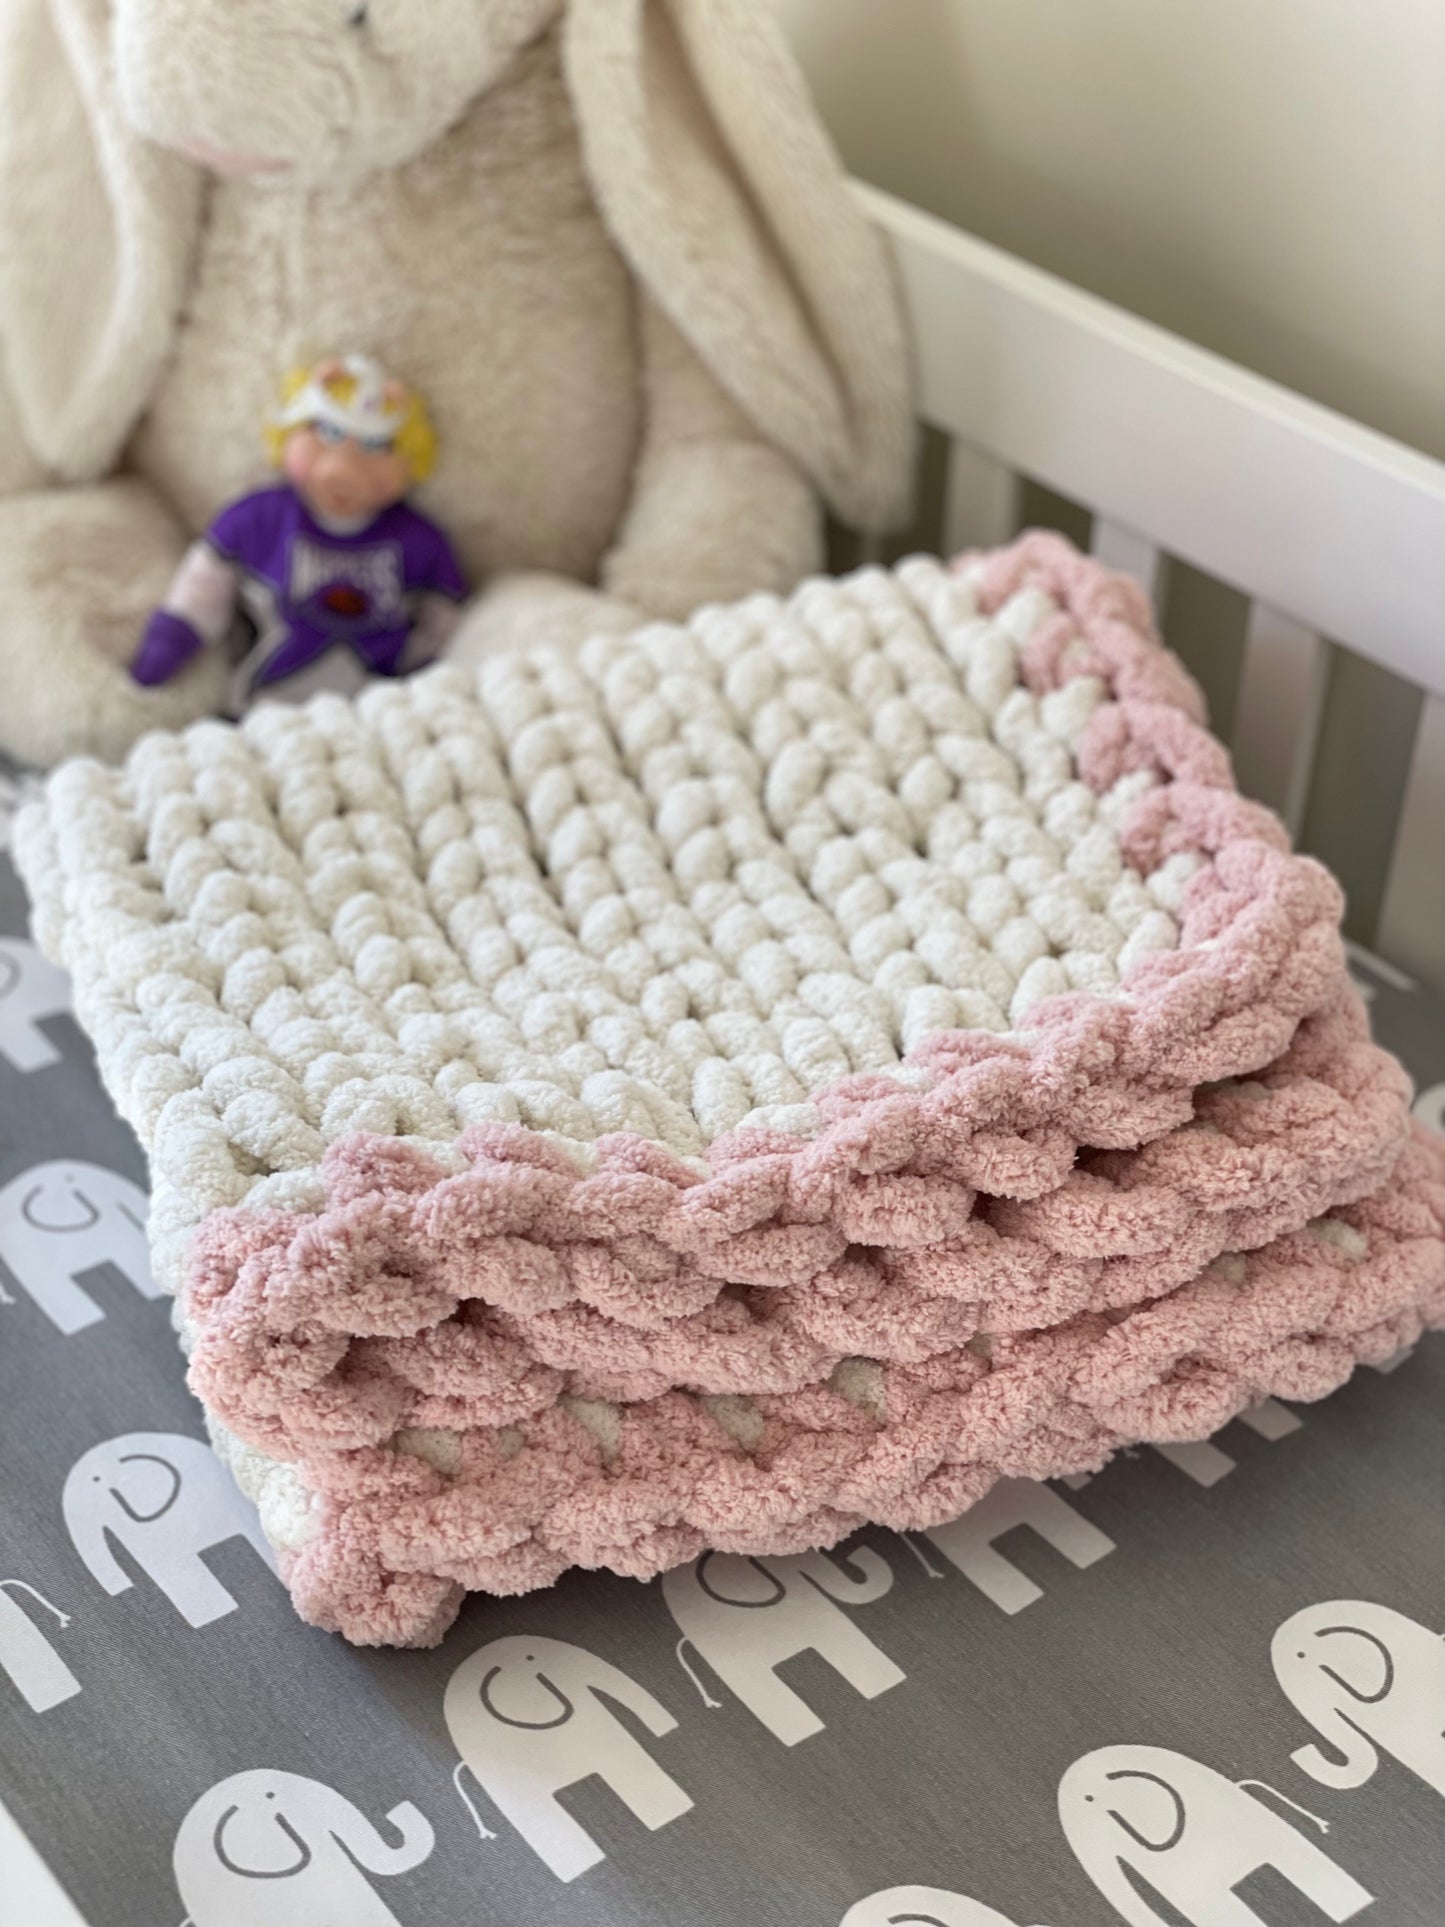 Healing Hand, Chunky Knit Baby Blankets - White with Soft Pink Edge